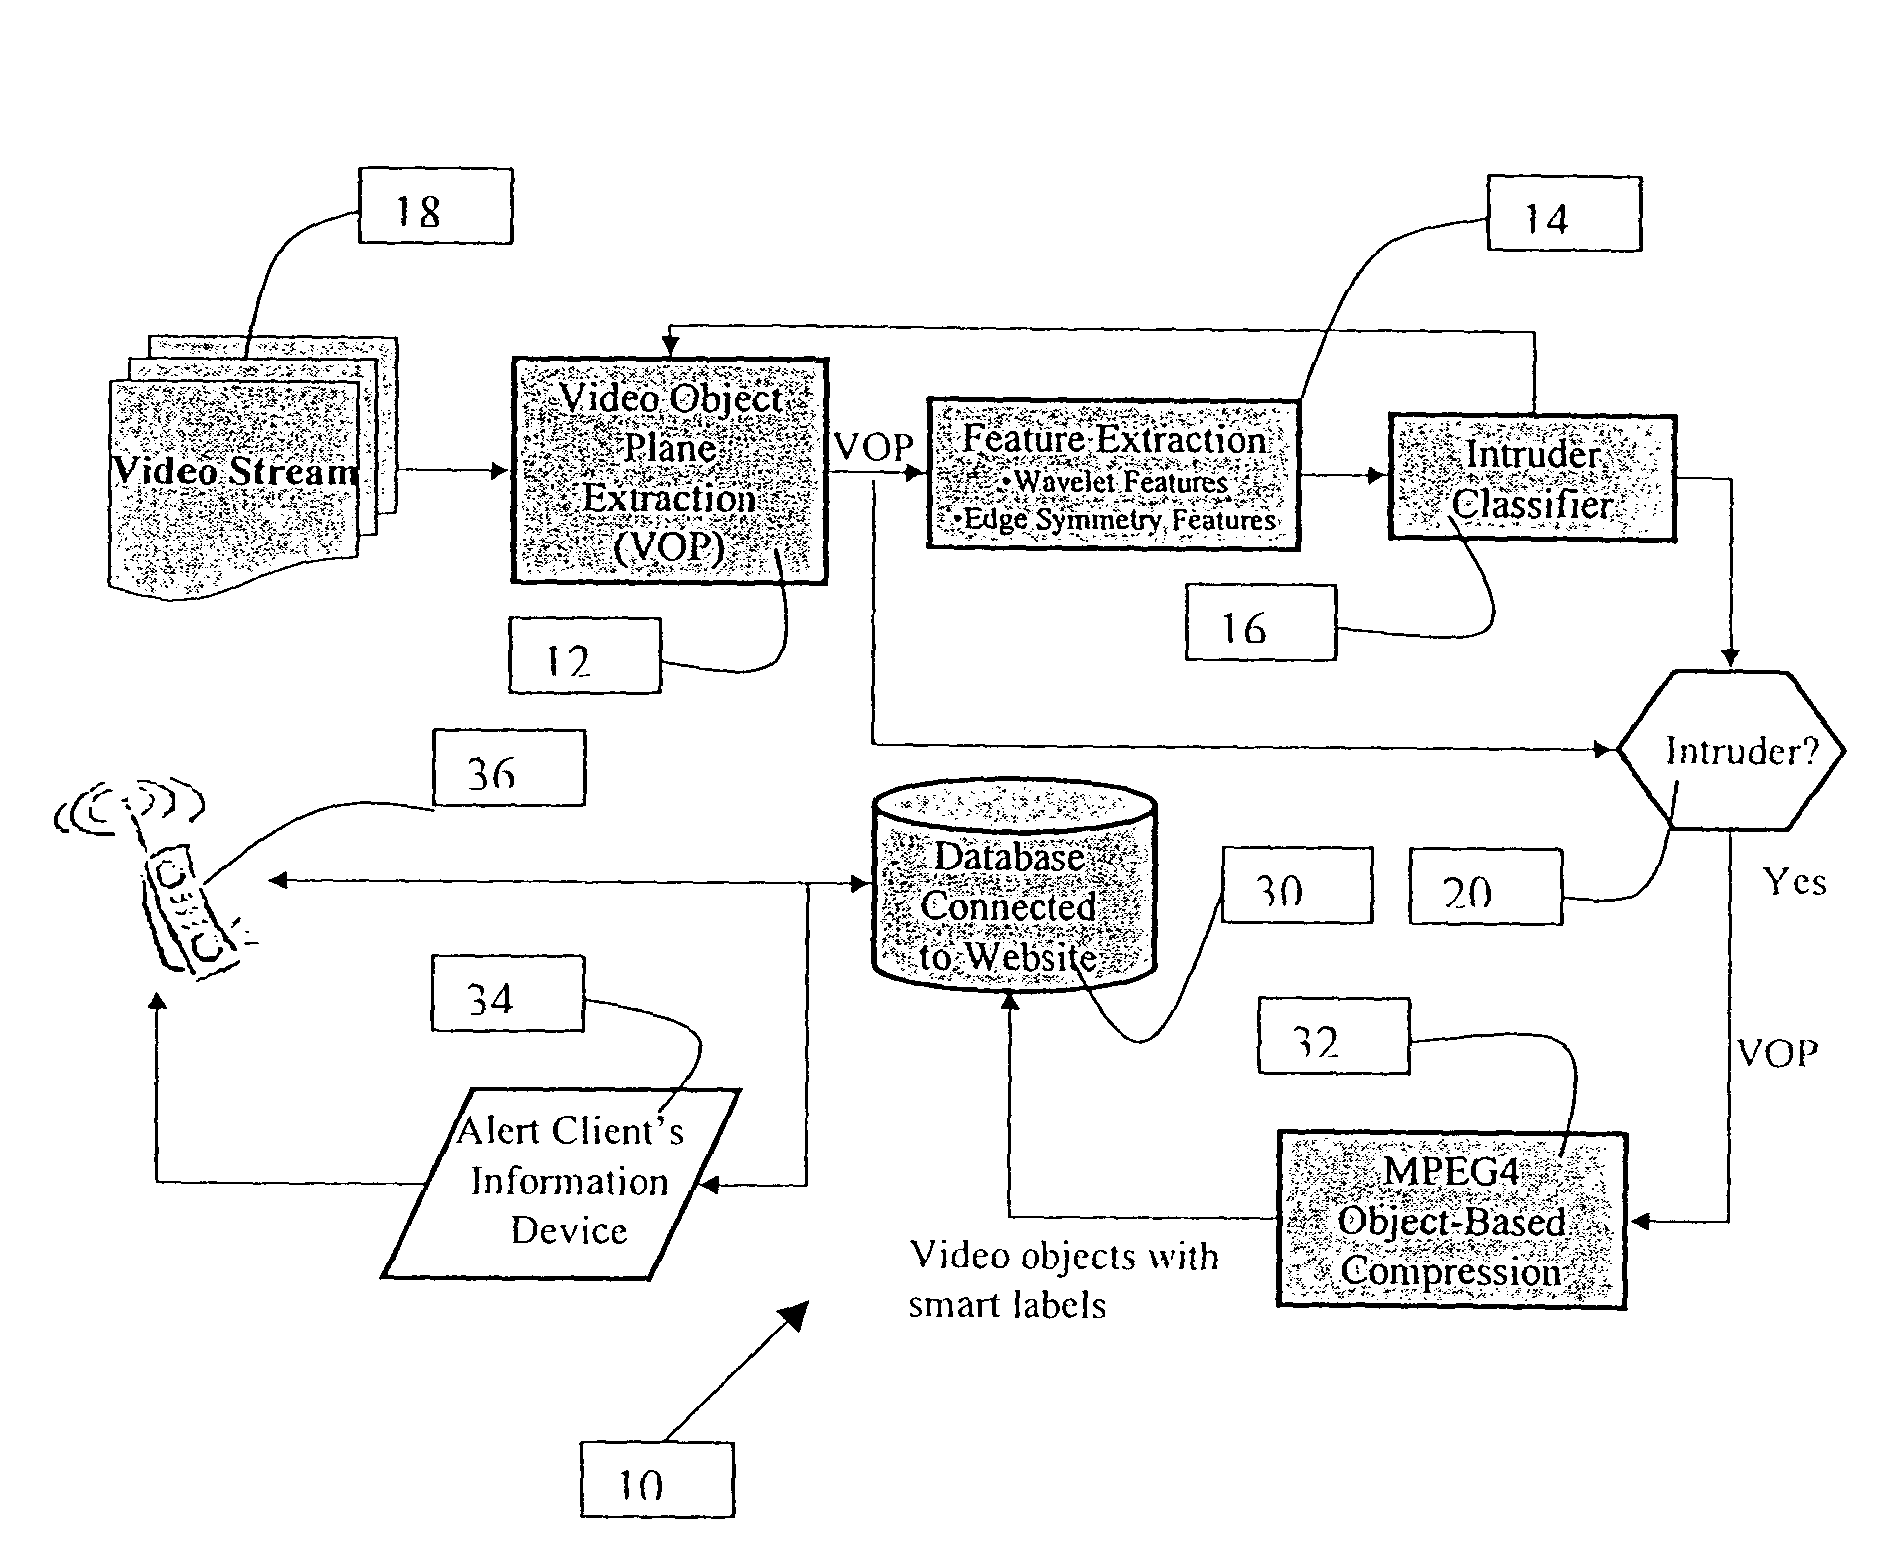 Application-specific object-based segmentation and recognition system